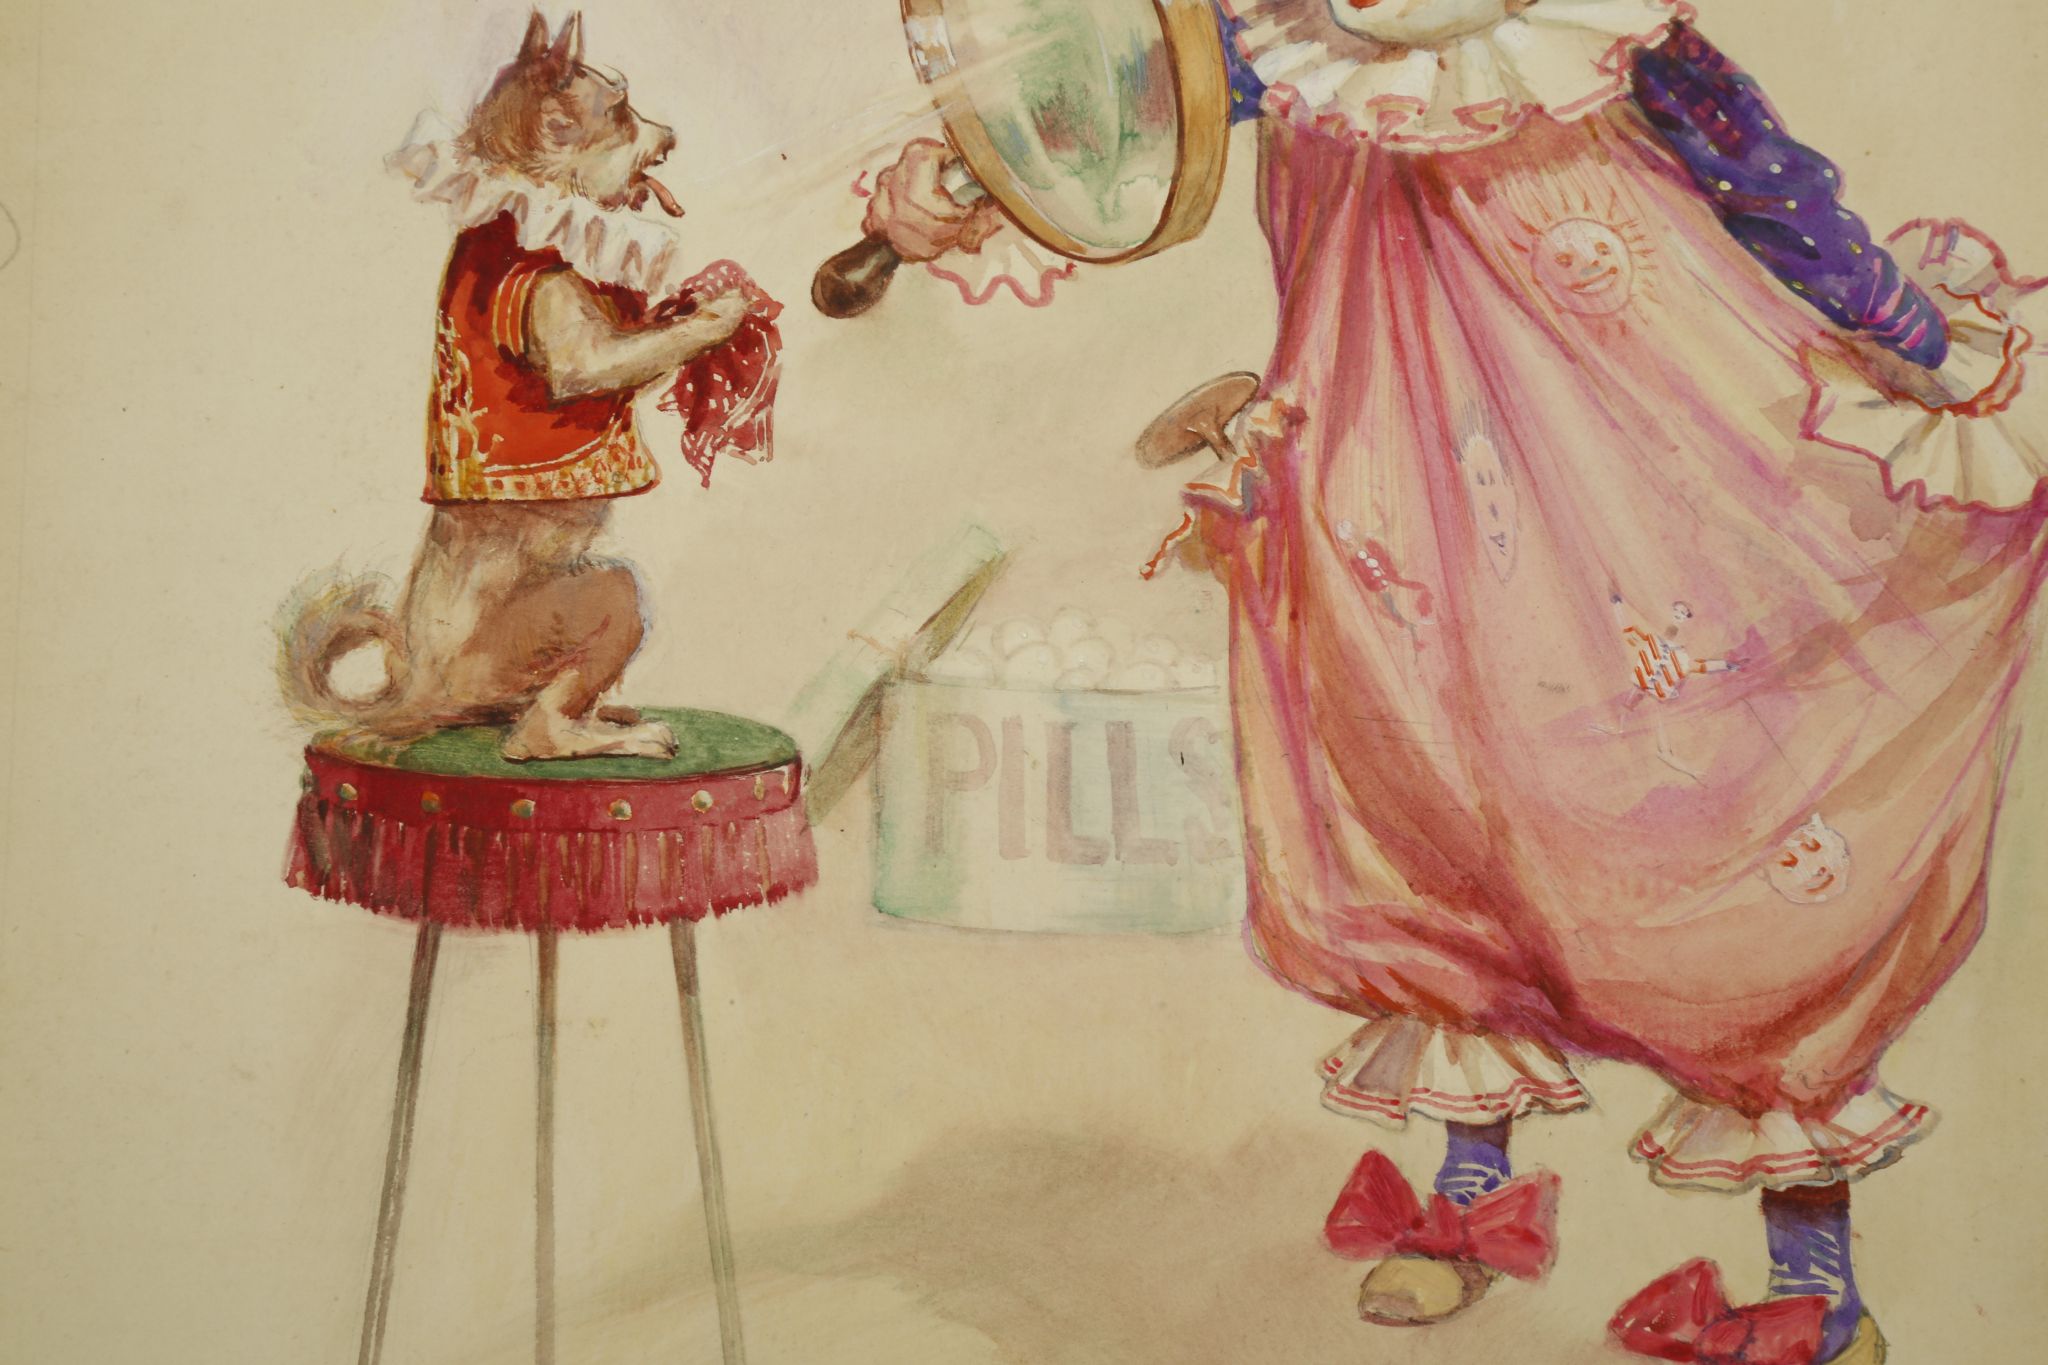 VICTORIAN CIRCUS ILLUSTRATIONS. Six original hand-coloured printed illustrations depicting various - Image 9 of 9